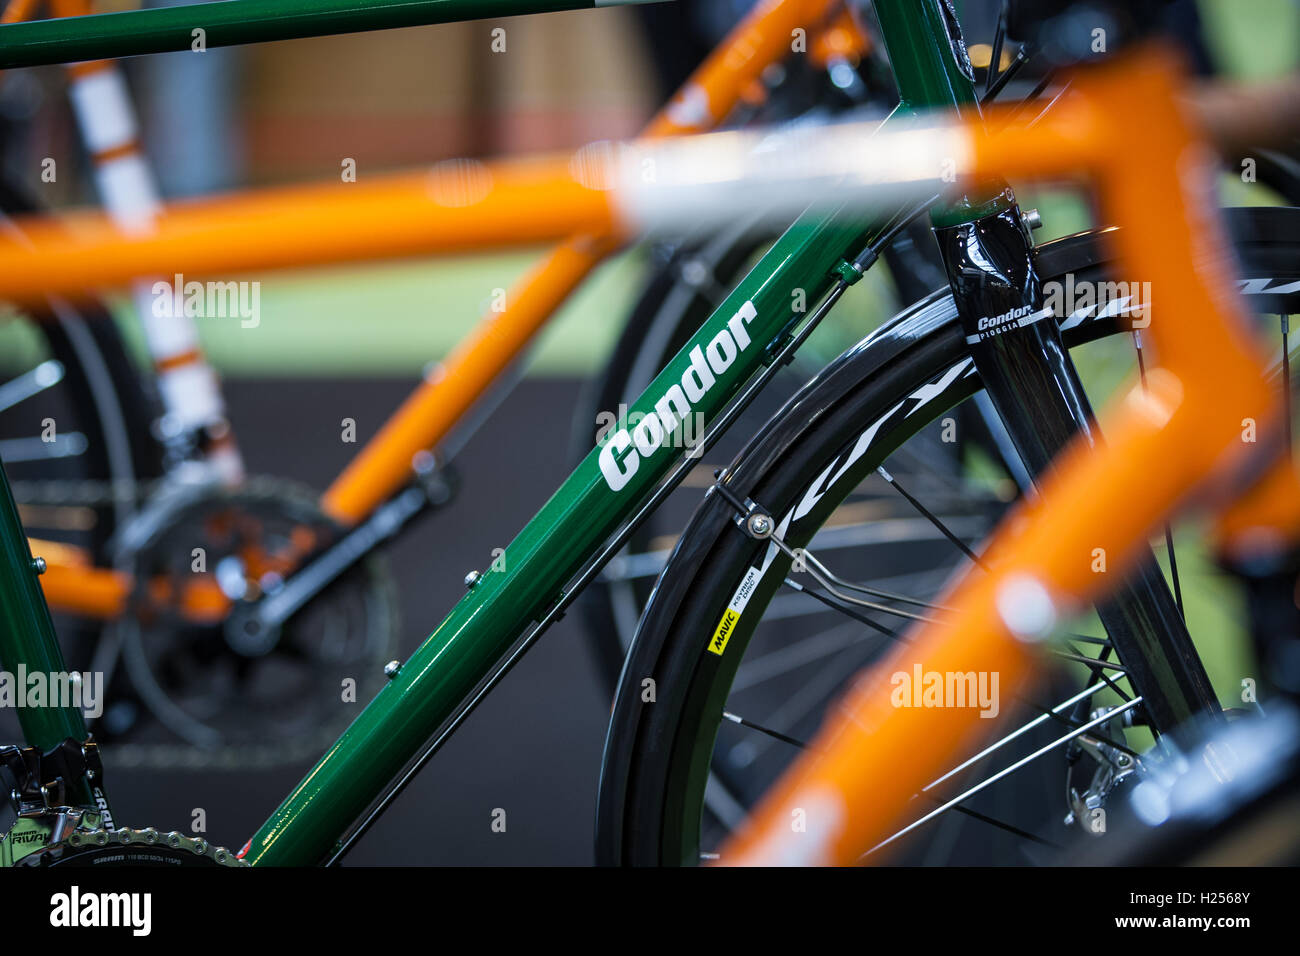 Condor Bike High Resolution Stock Photography and Images - Alamy